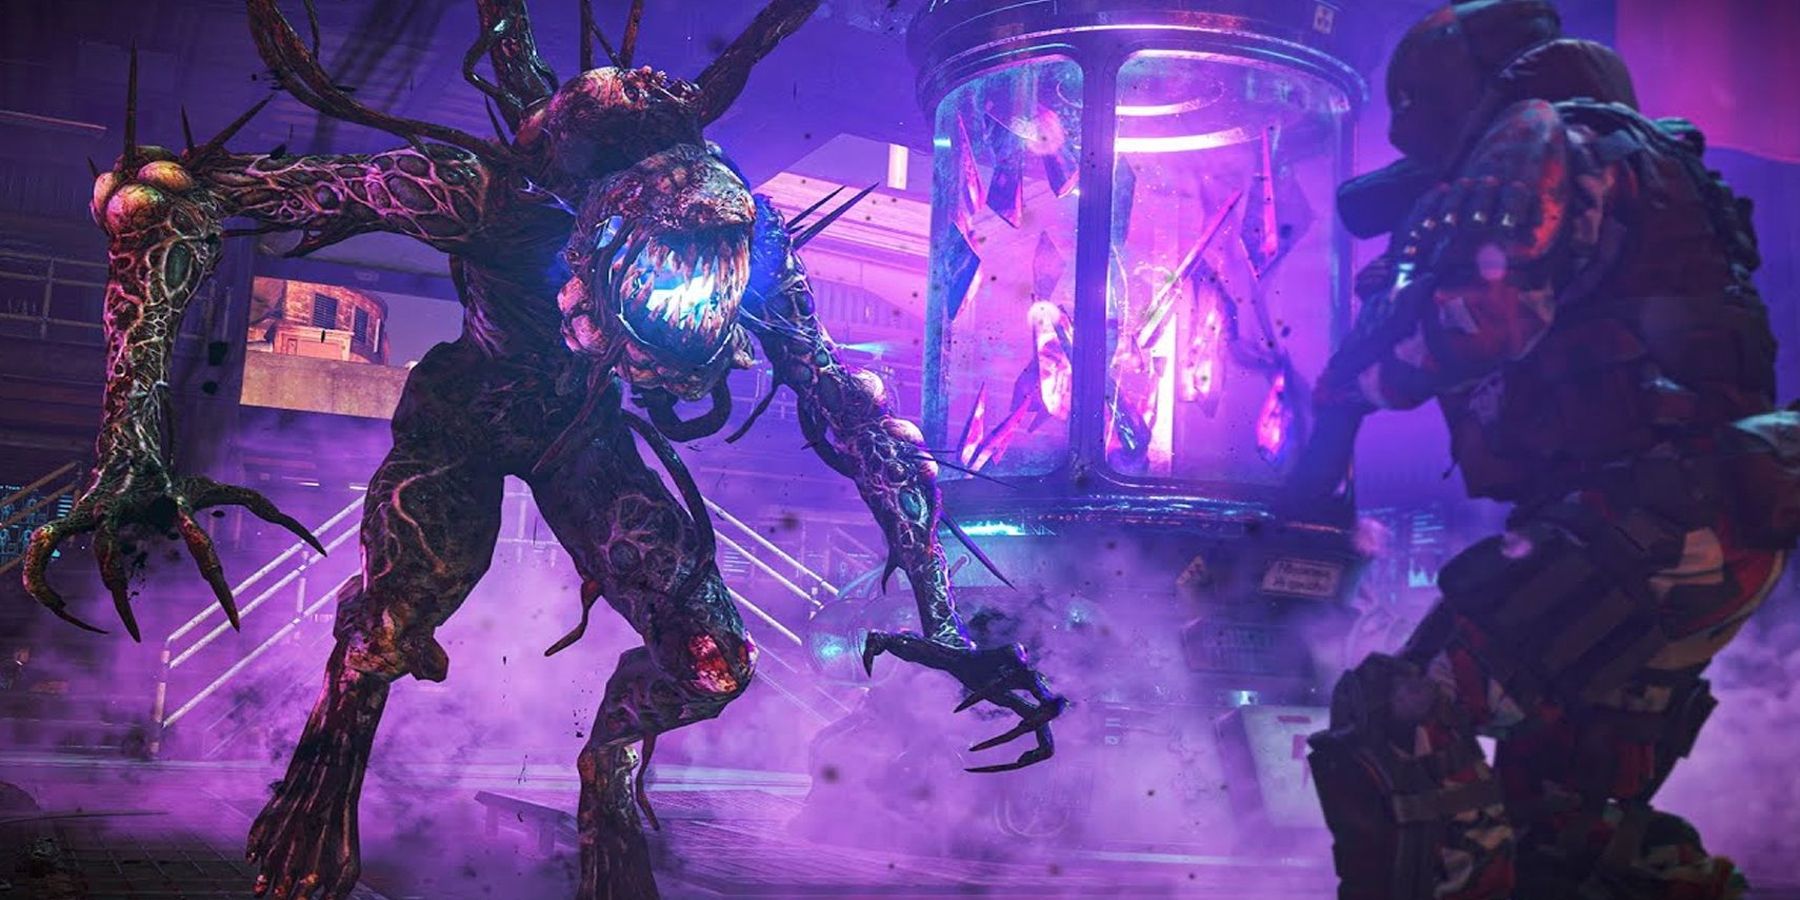 A promotional image for the Call of Duty Black Ops Cold War zombies map Forsaken showing a player facing a hulking mutated zombie.